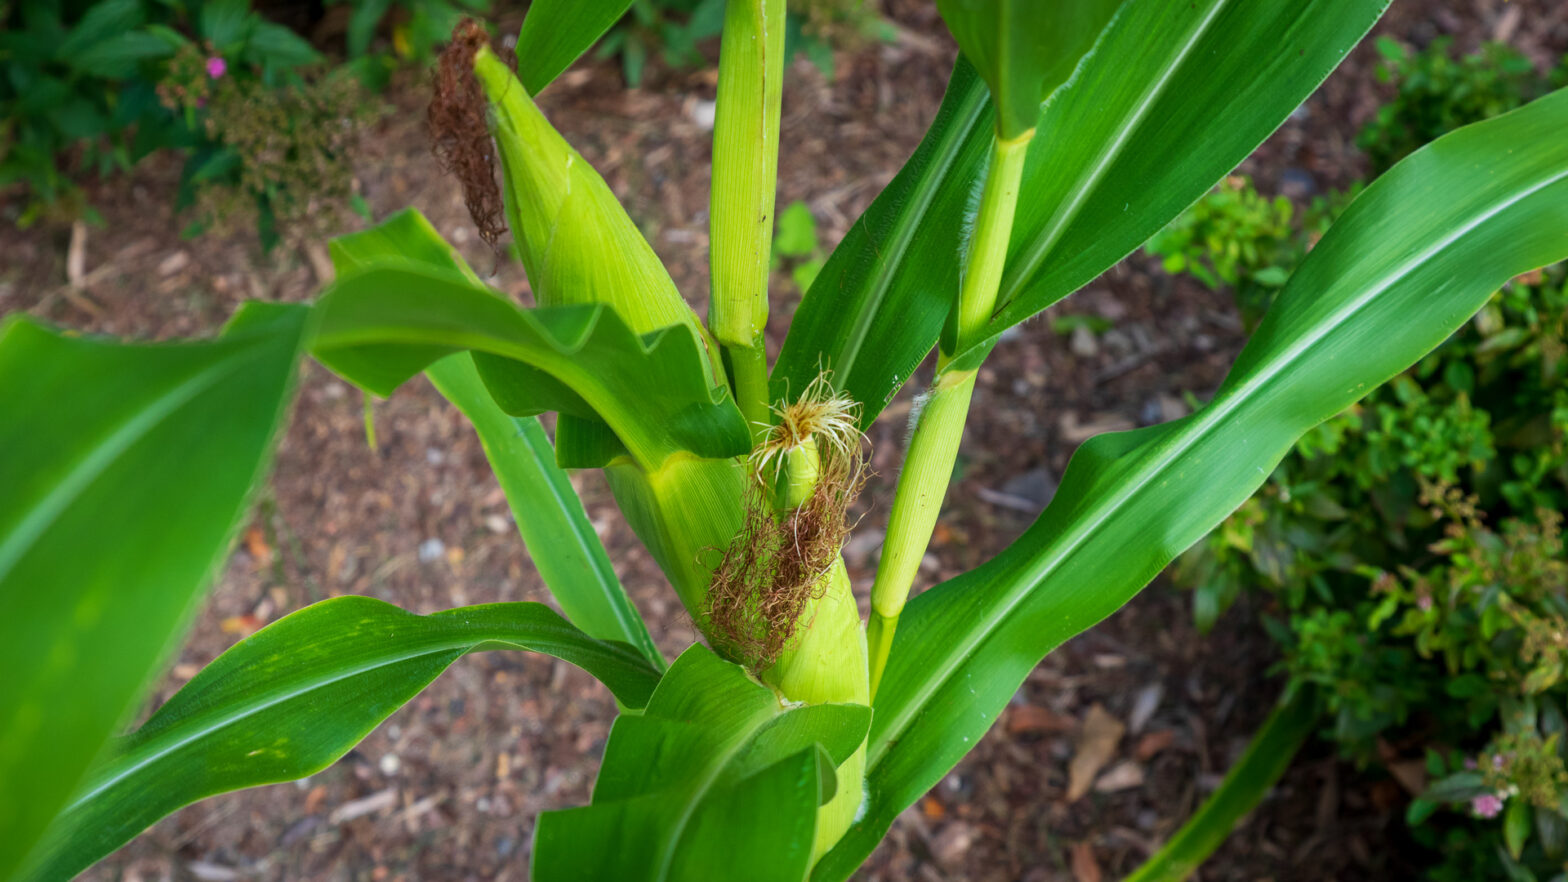 Ears of Corn Growing on Corn Plant in Foundation Planting